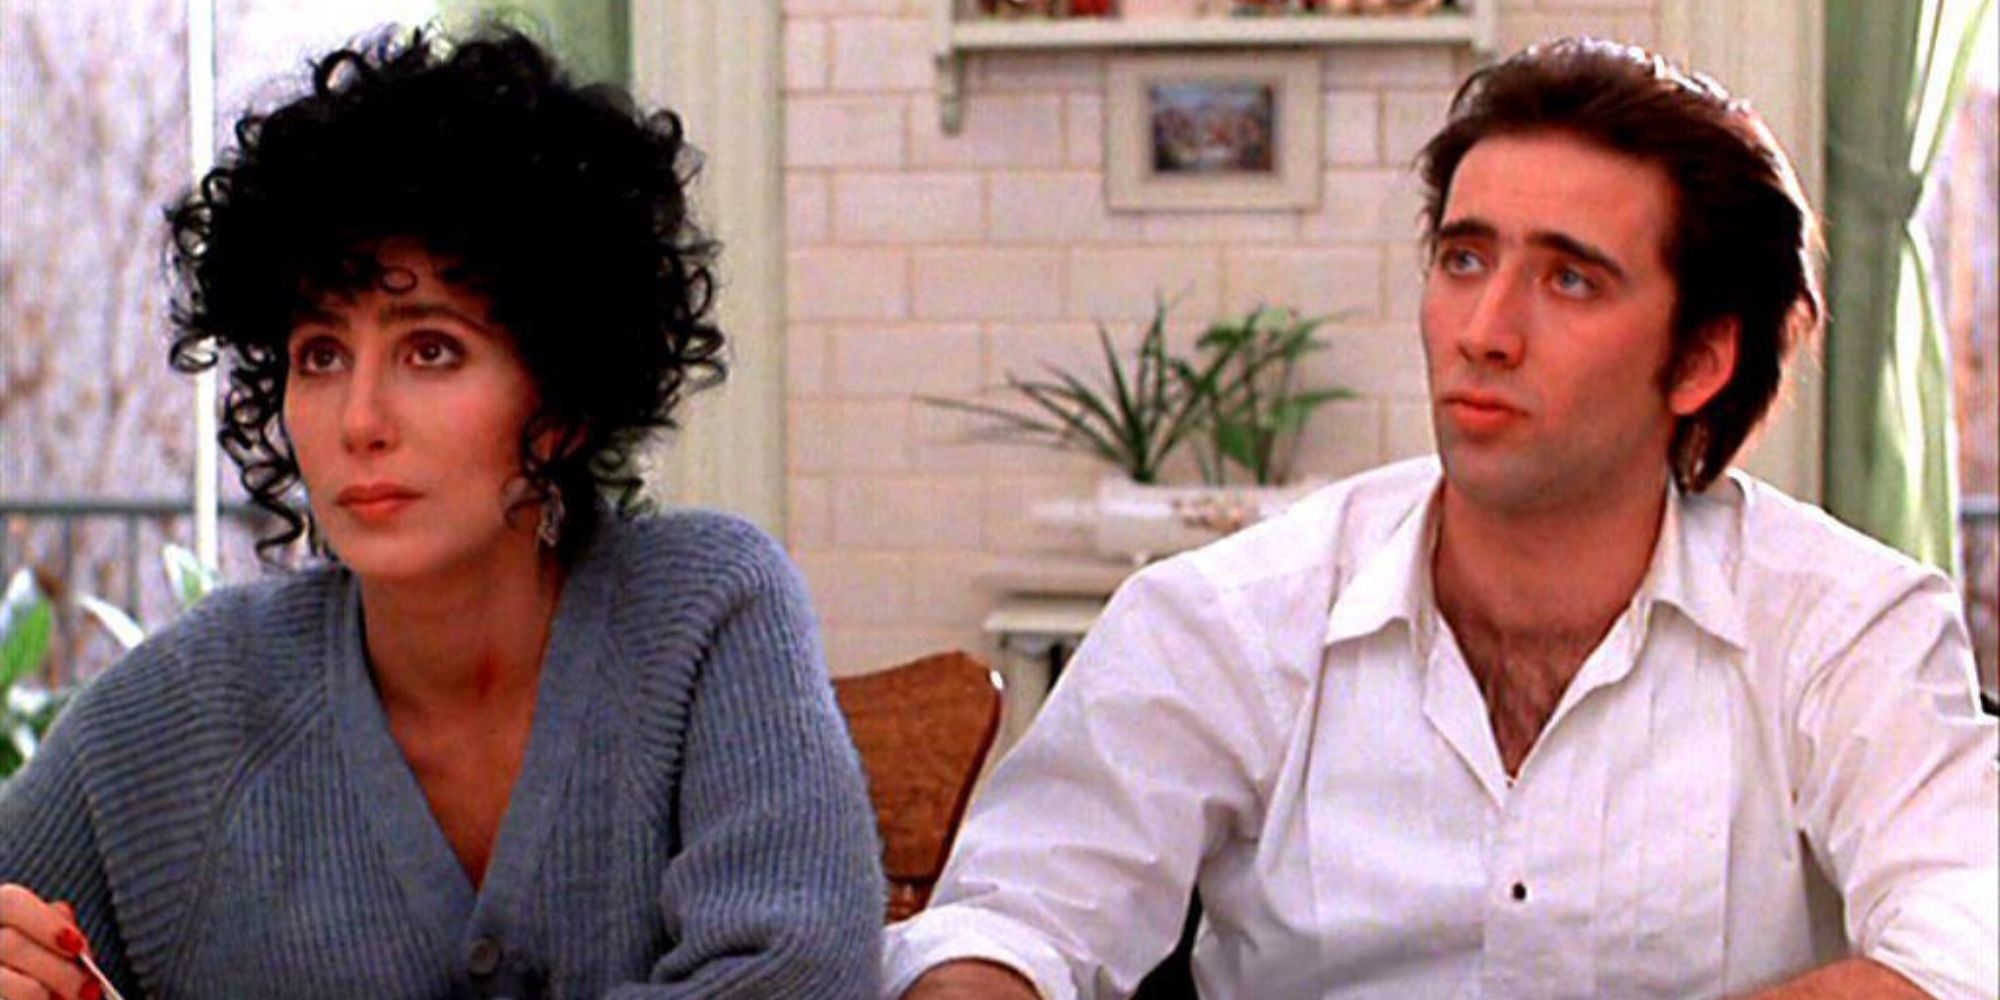 Cher and Nicolas Cage from Moonstruck sitting together